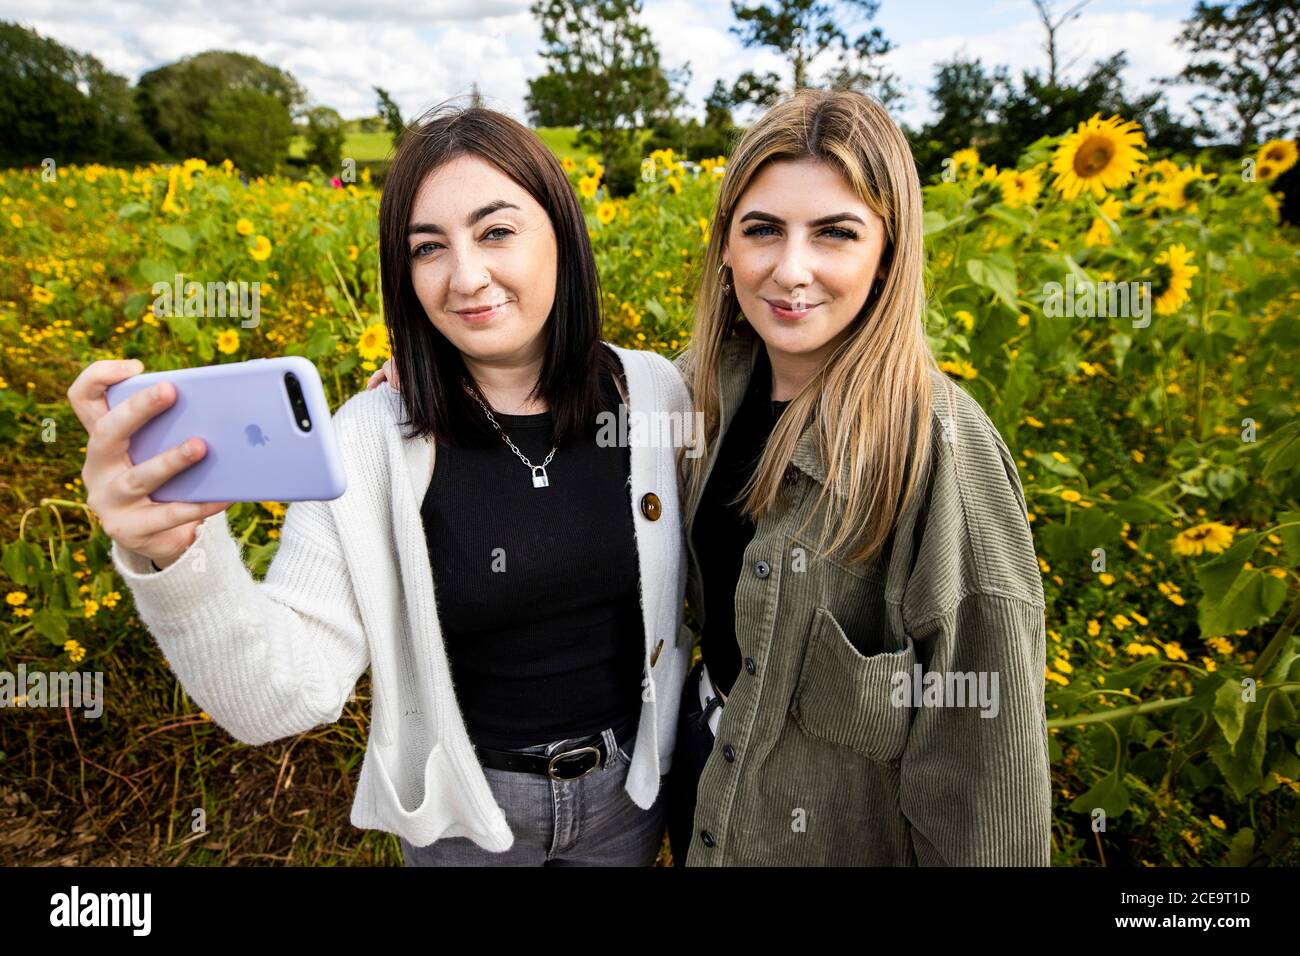 Becky Browne (left) taken a selfie with her sister Katie Browne, on a day trip from Carrickfergus pictured together at the Sunflower Field Portglenone, on Bank Holiday Monday in Northern Ireland. Stock Photo